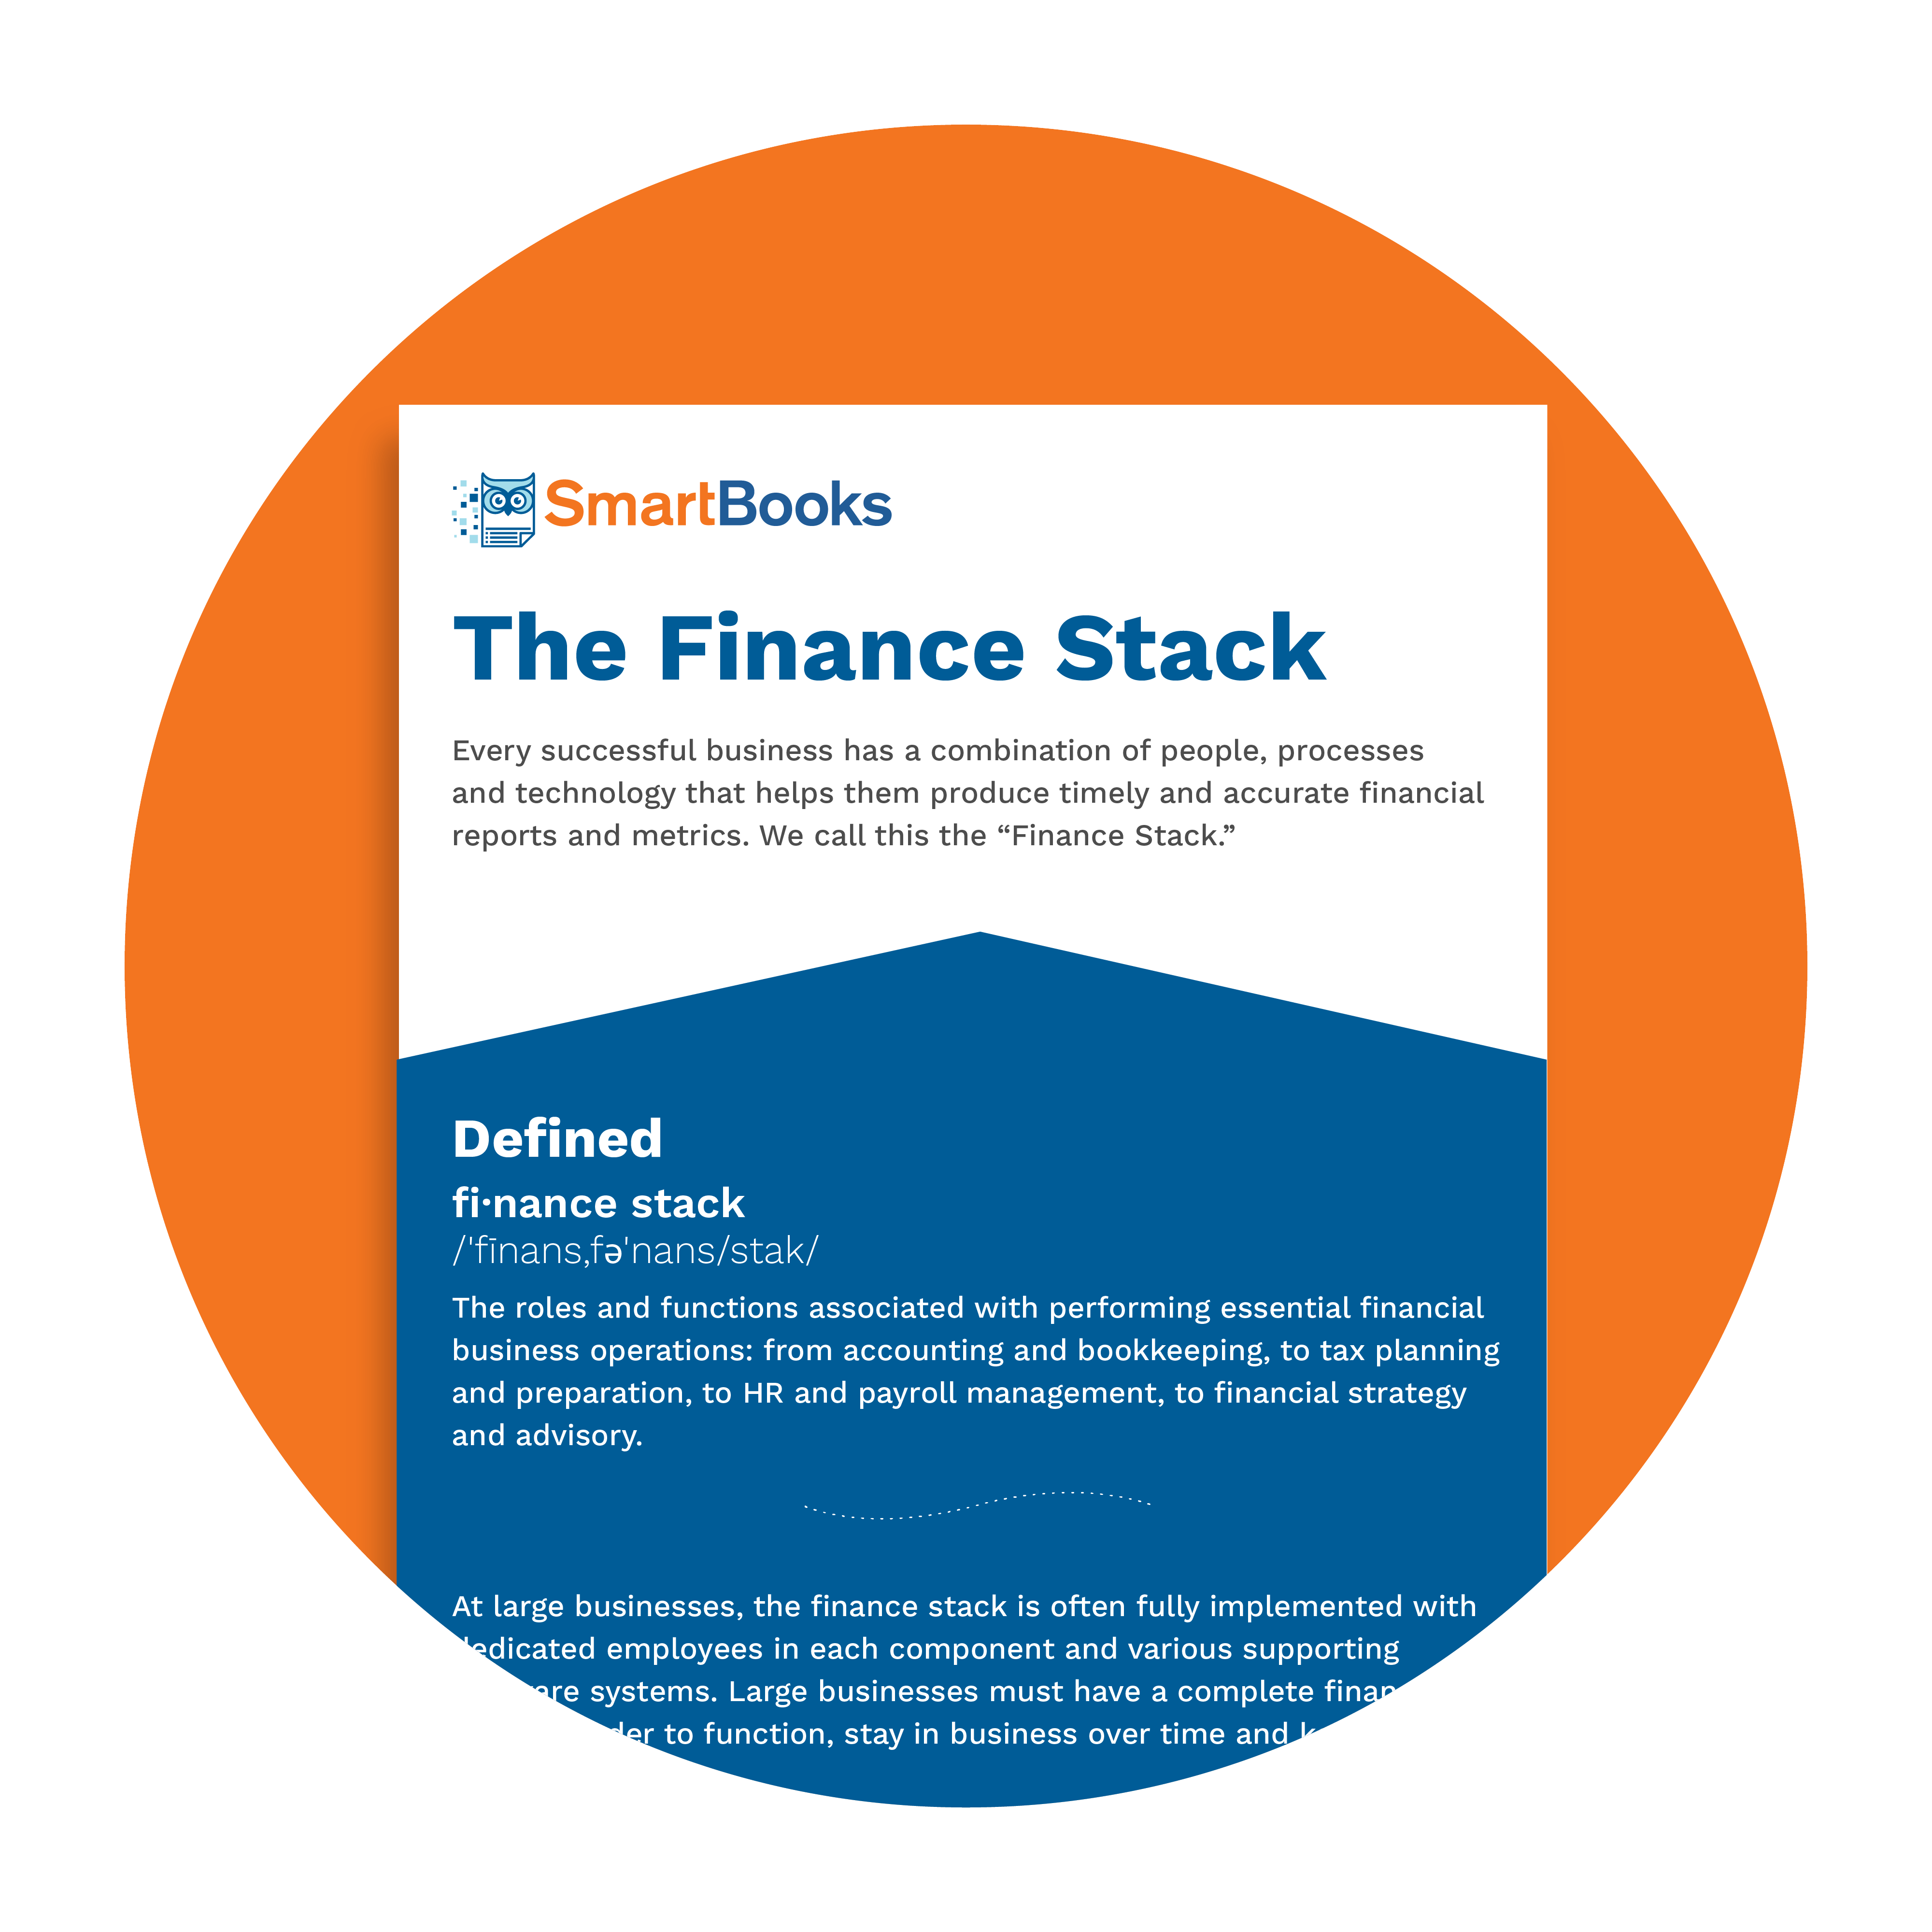 Image-The-Finance-Stack-Infographic